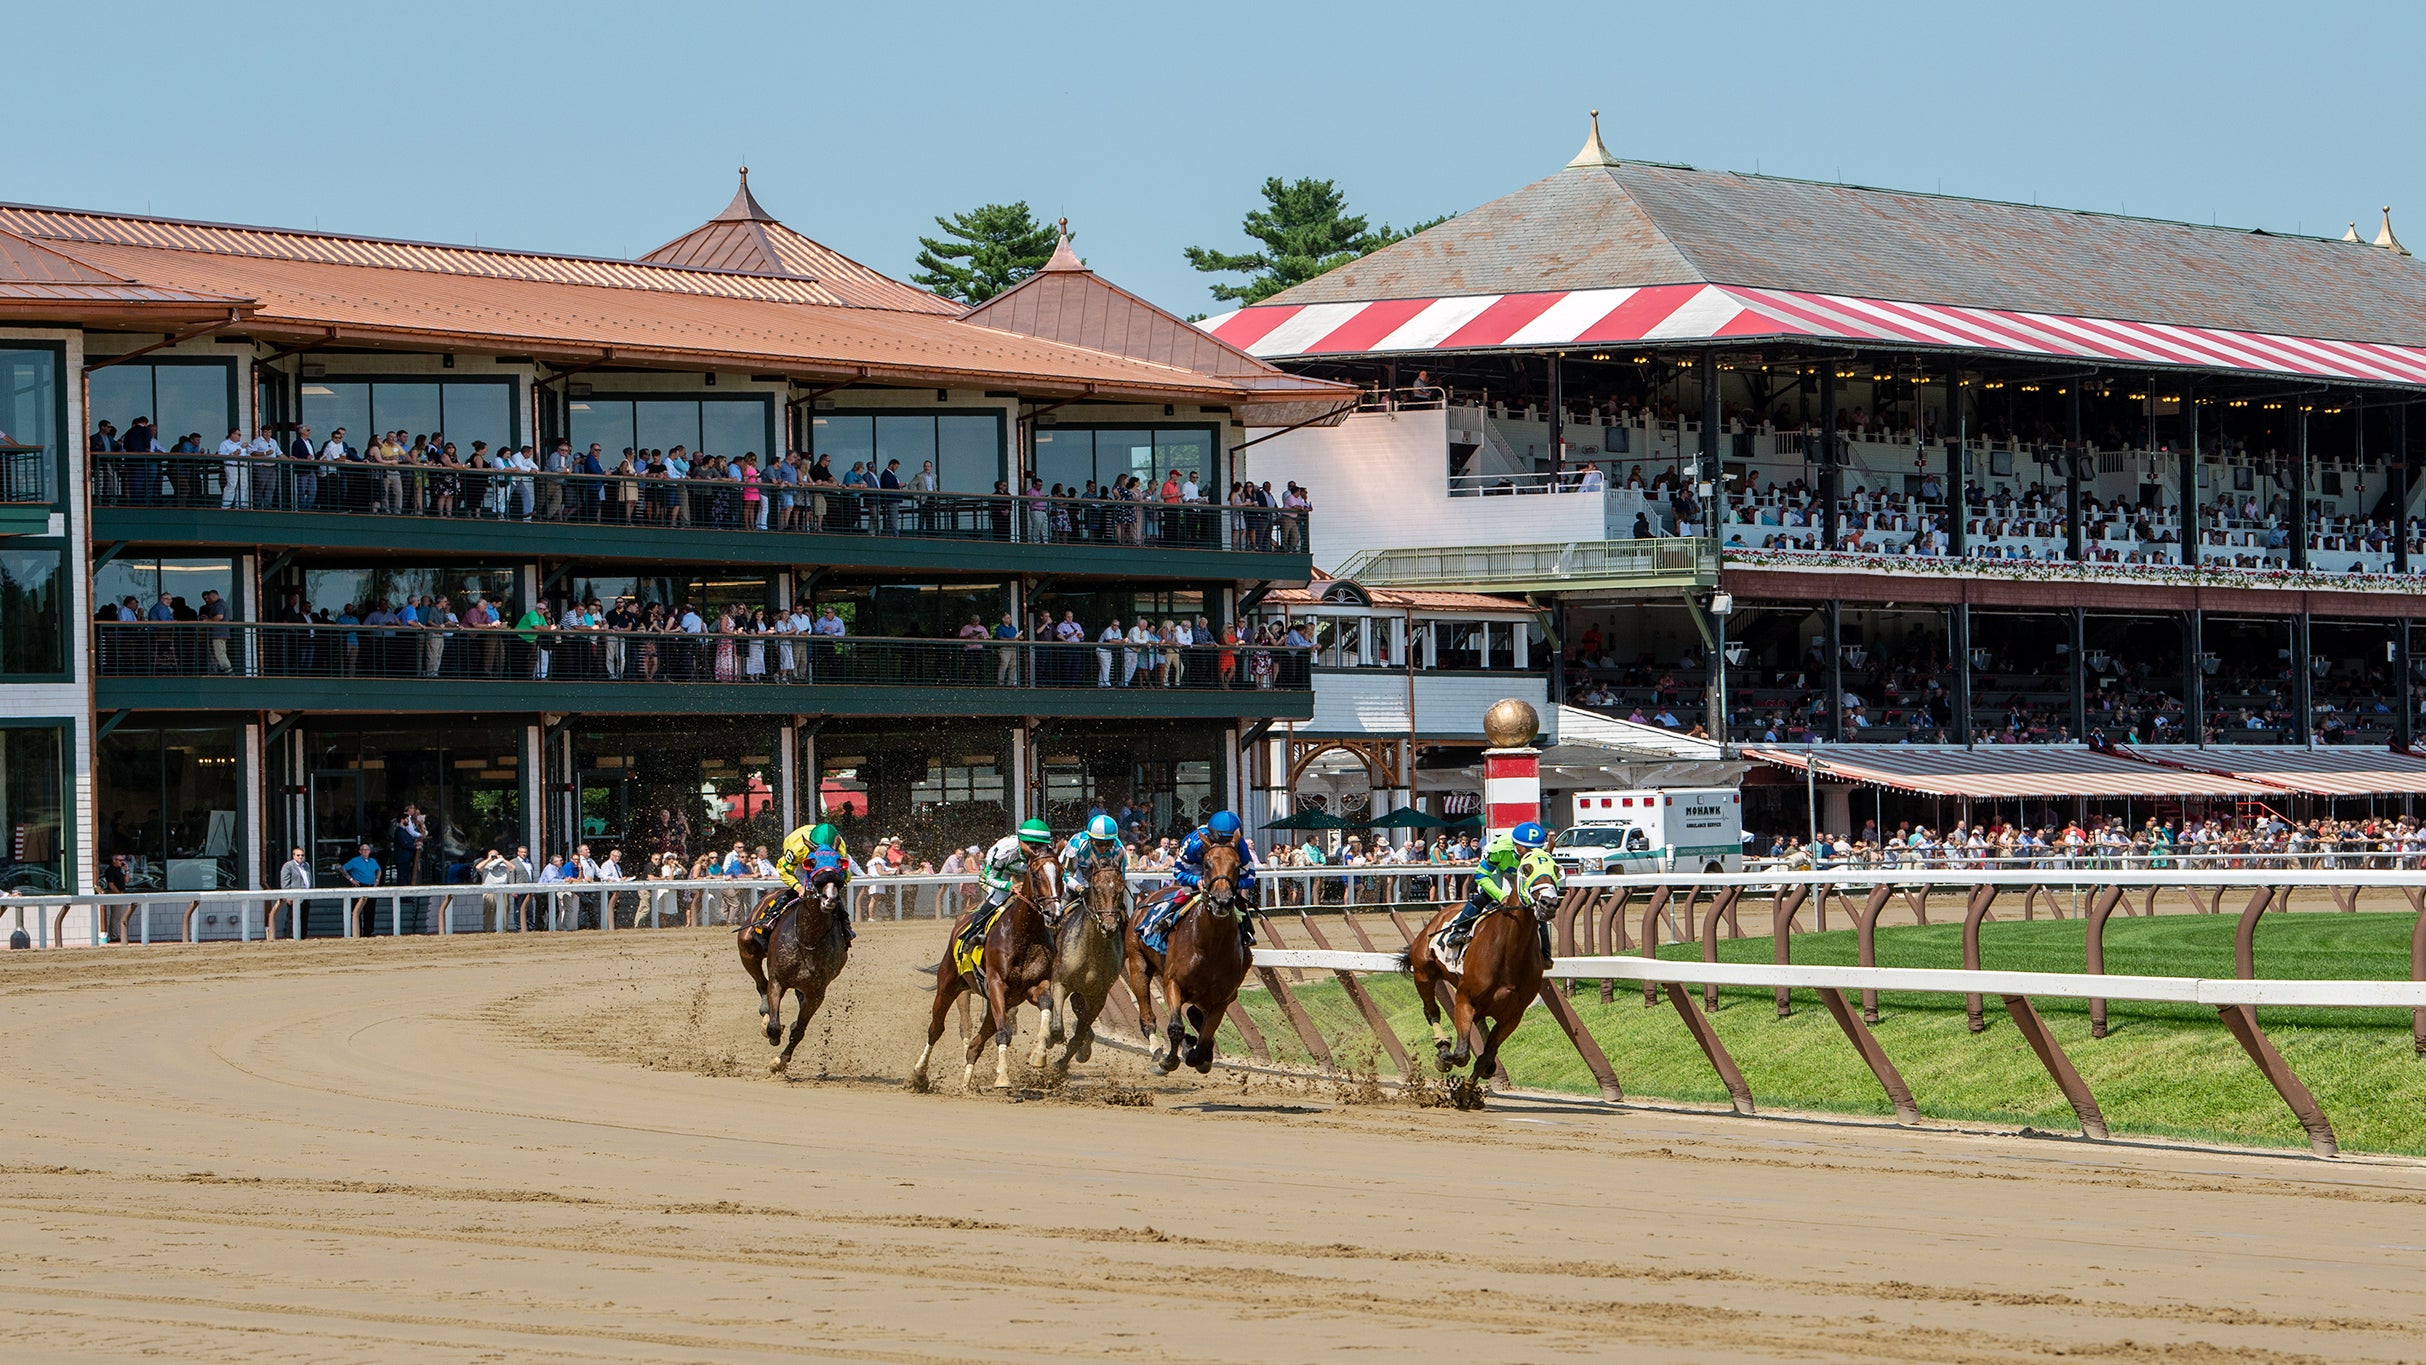 Saratoga Race Course Turf Terrace Dining in Saratoga Springs promo photo for Exclusive presale offer code